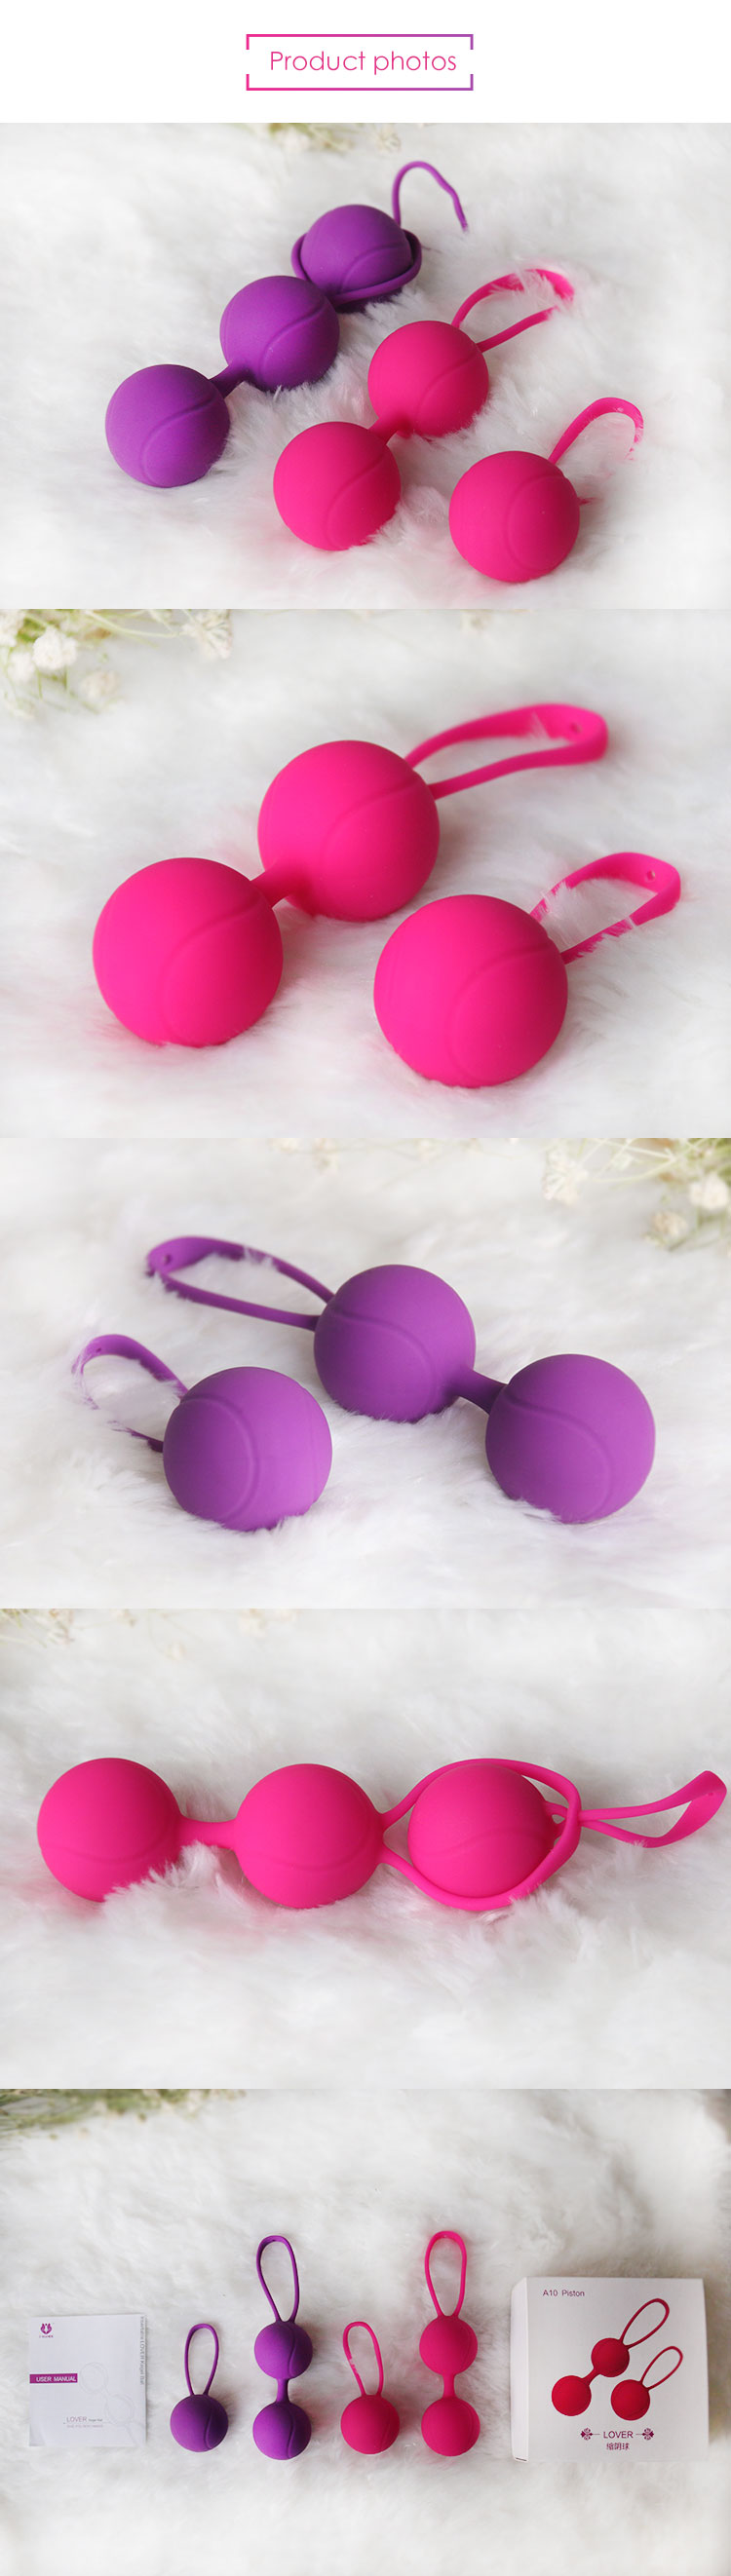 Hot Selling Silicone Ball Remote Controlled Ball Ben Wa Balls Exercise-07